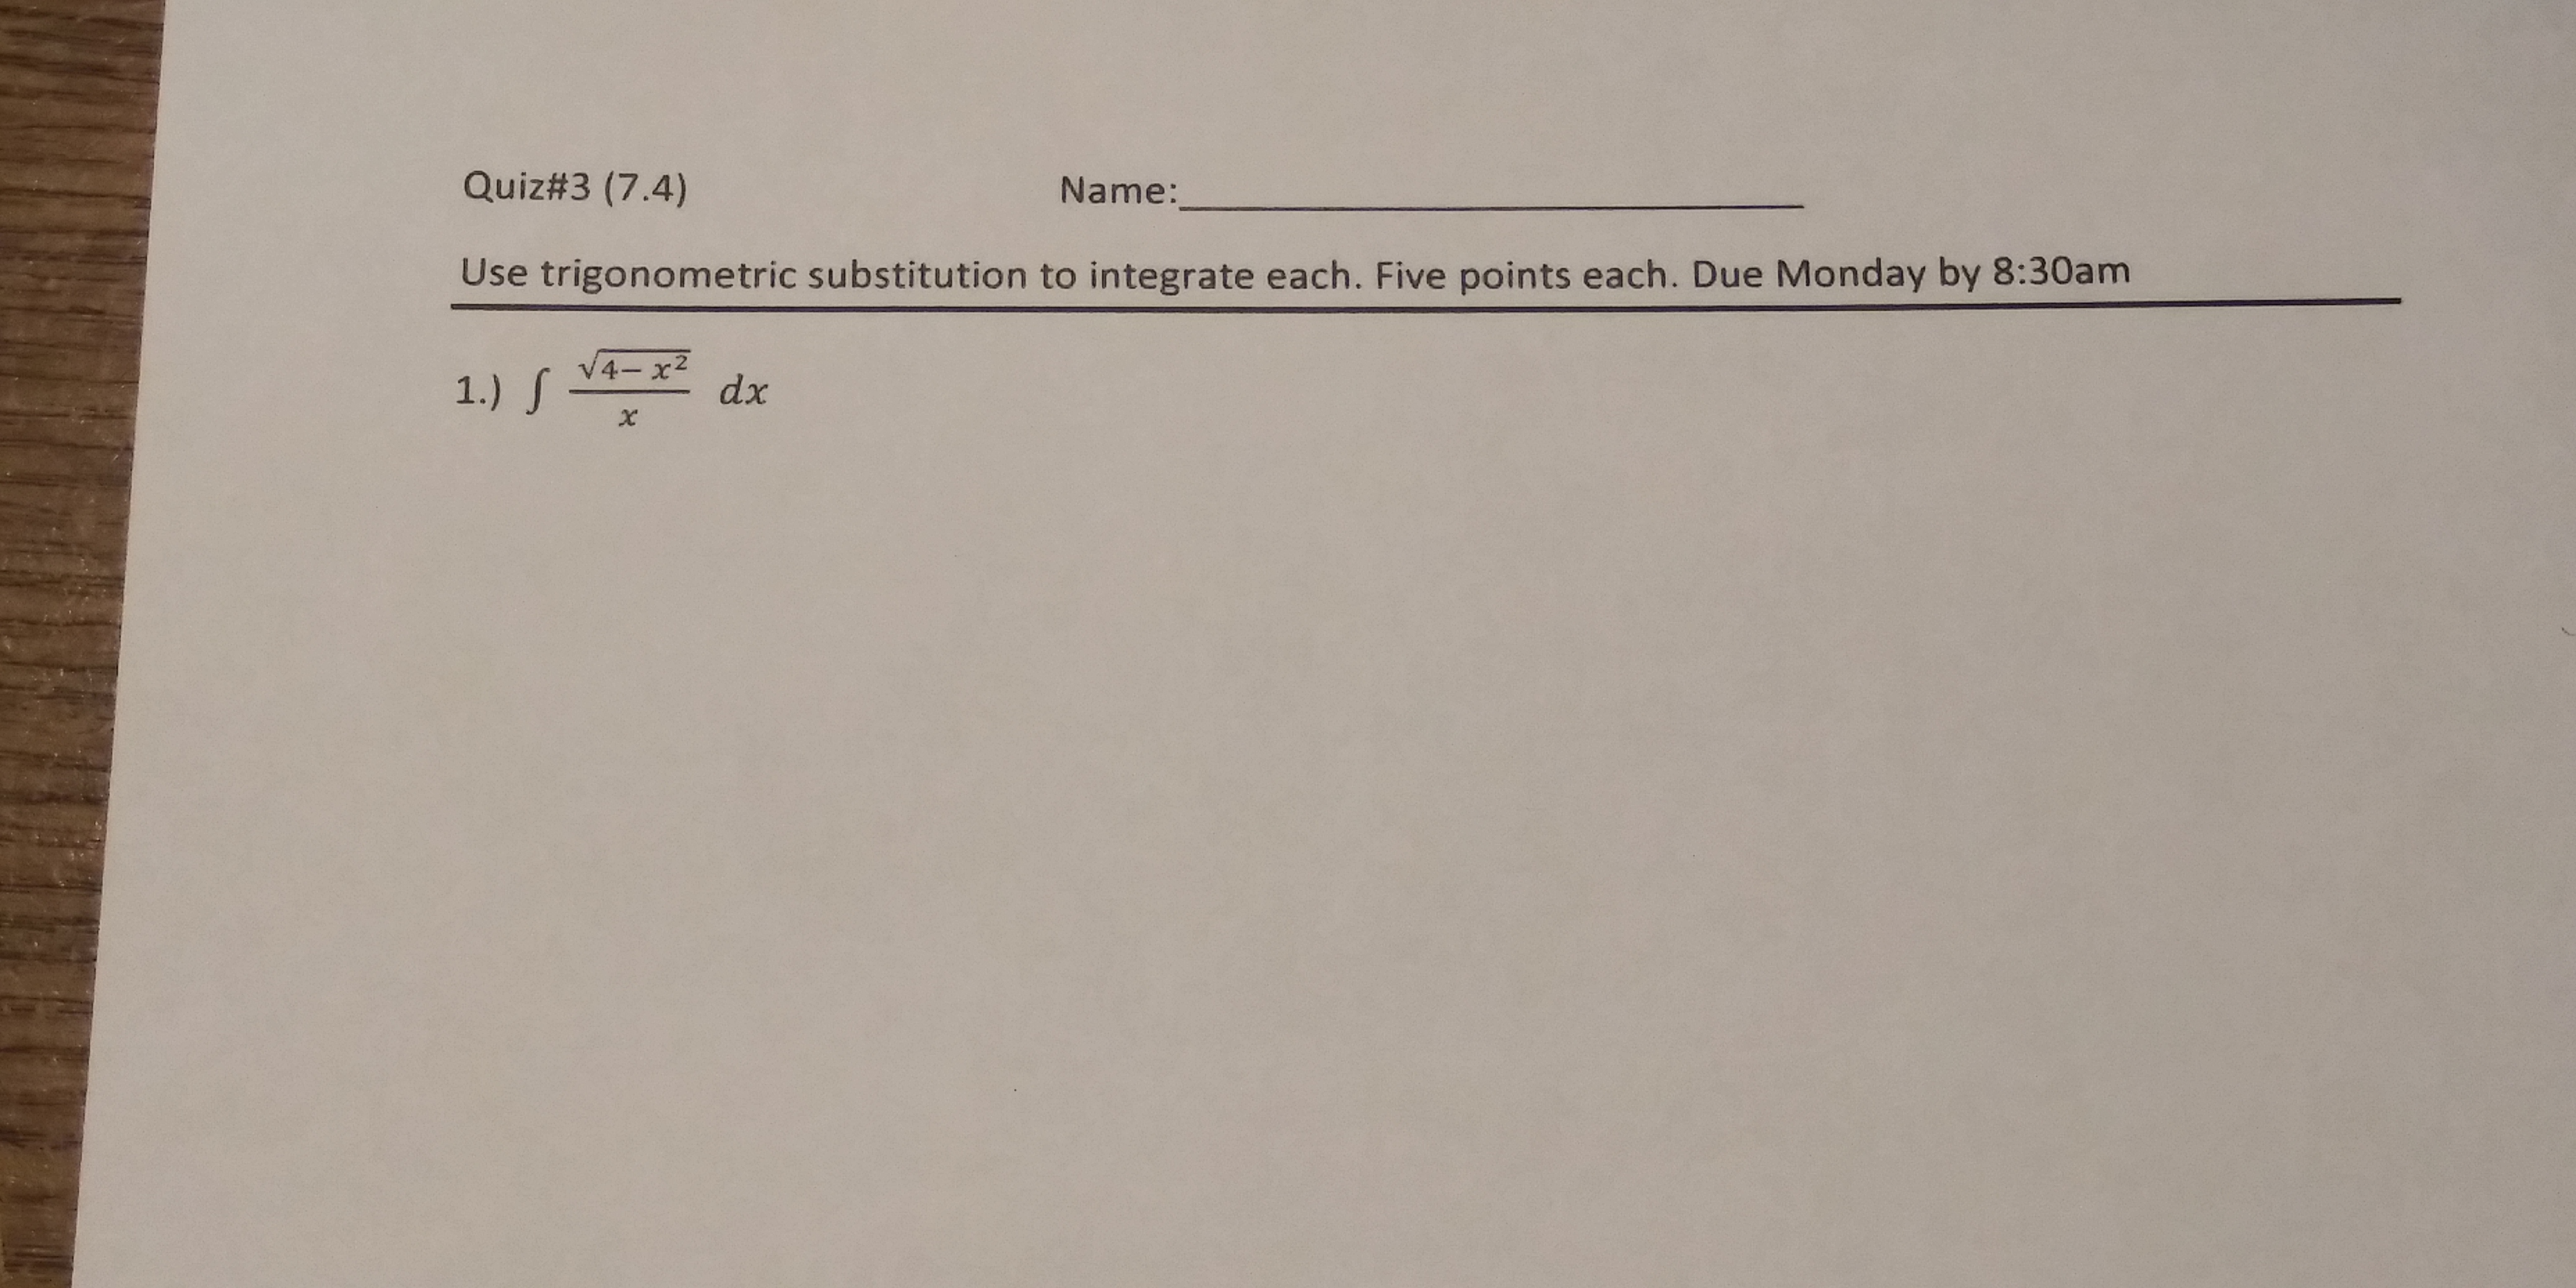 Quiz#3 (7.4)
Name:
Use trigonometric substitution to integrate each. Five points each. Due Monday by 8:30am
4- x2
